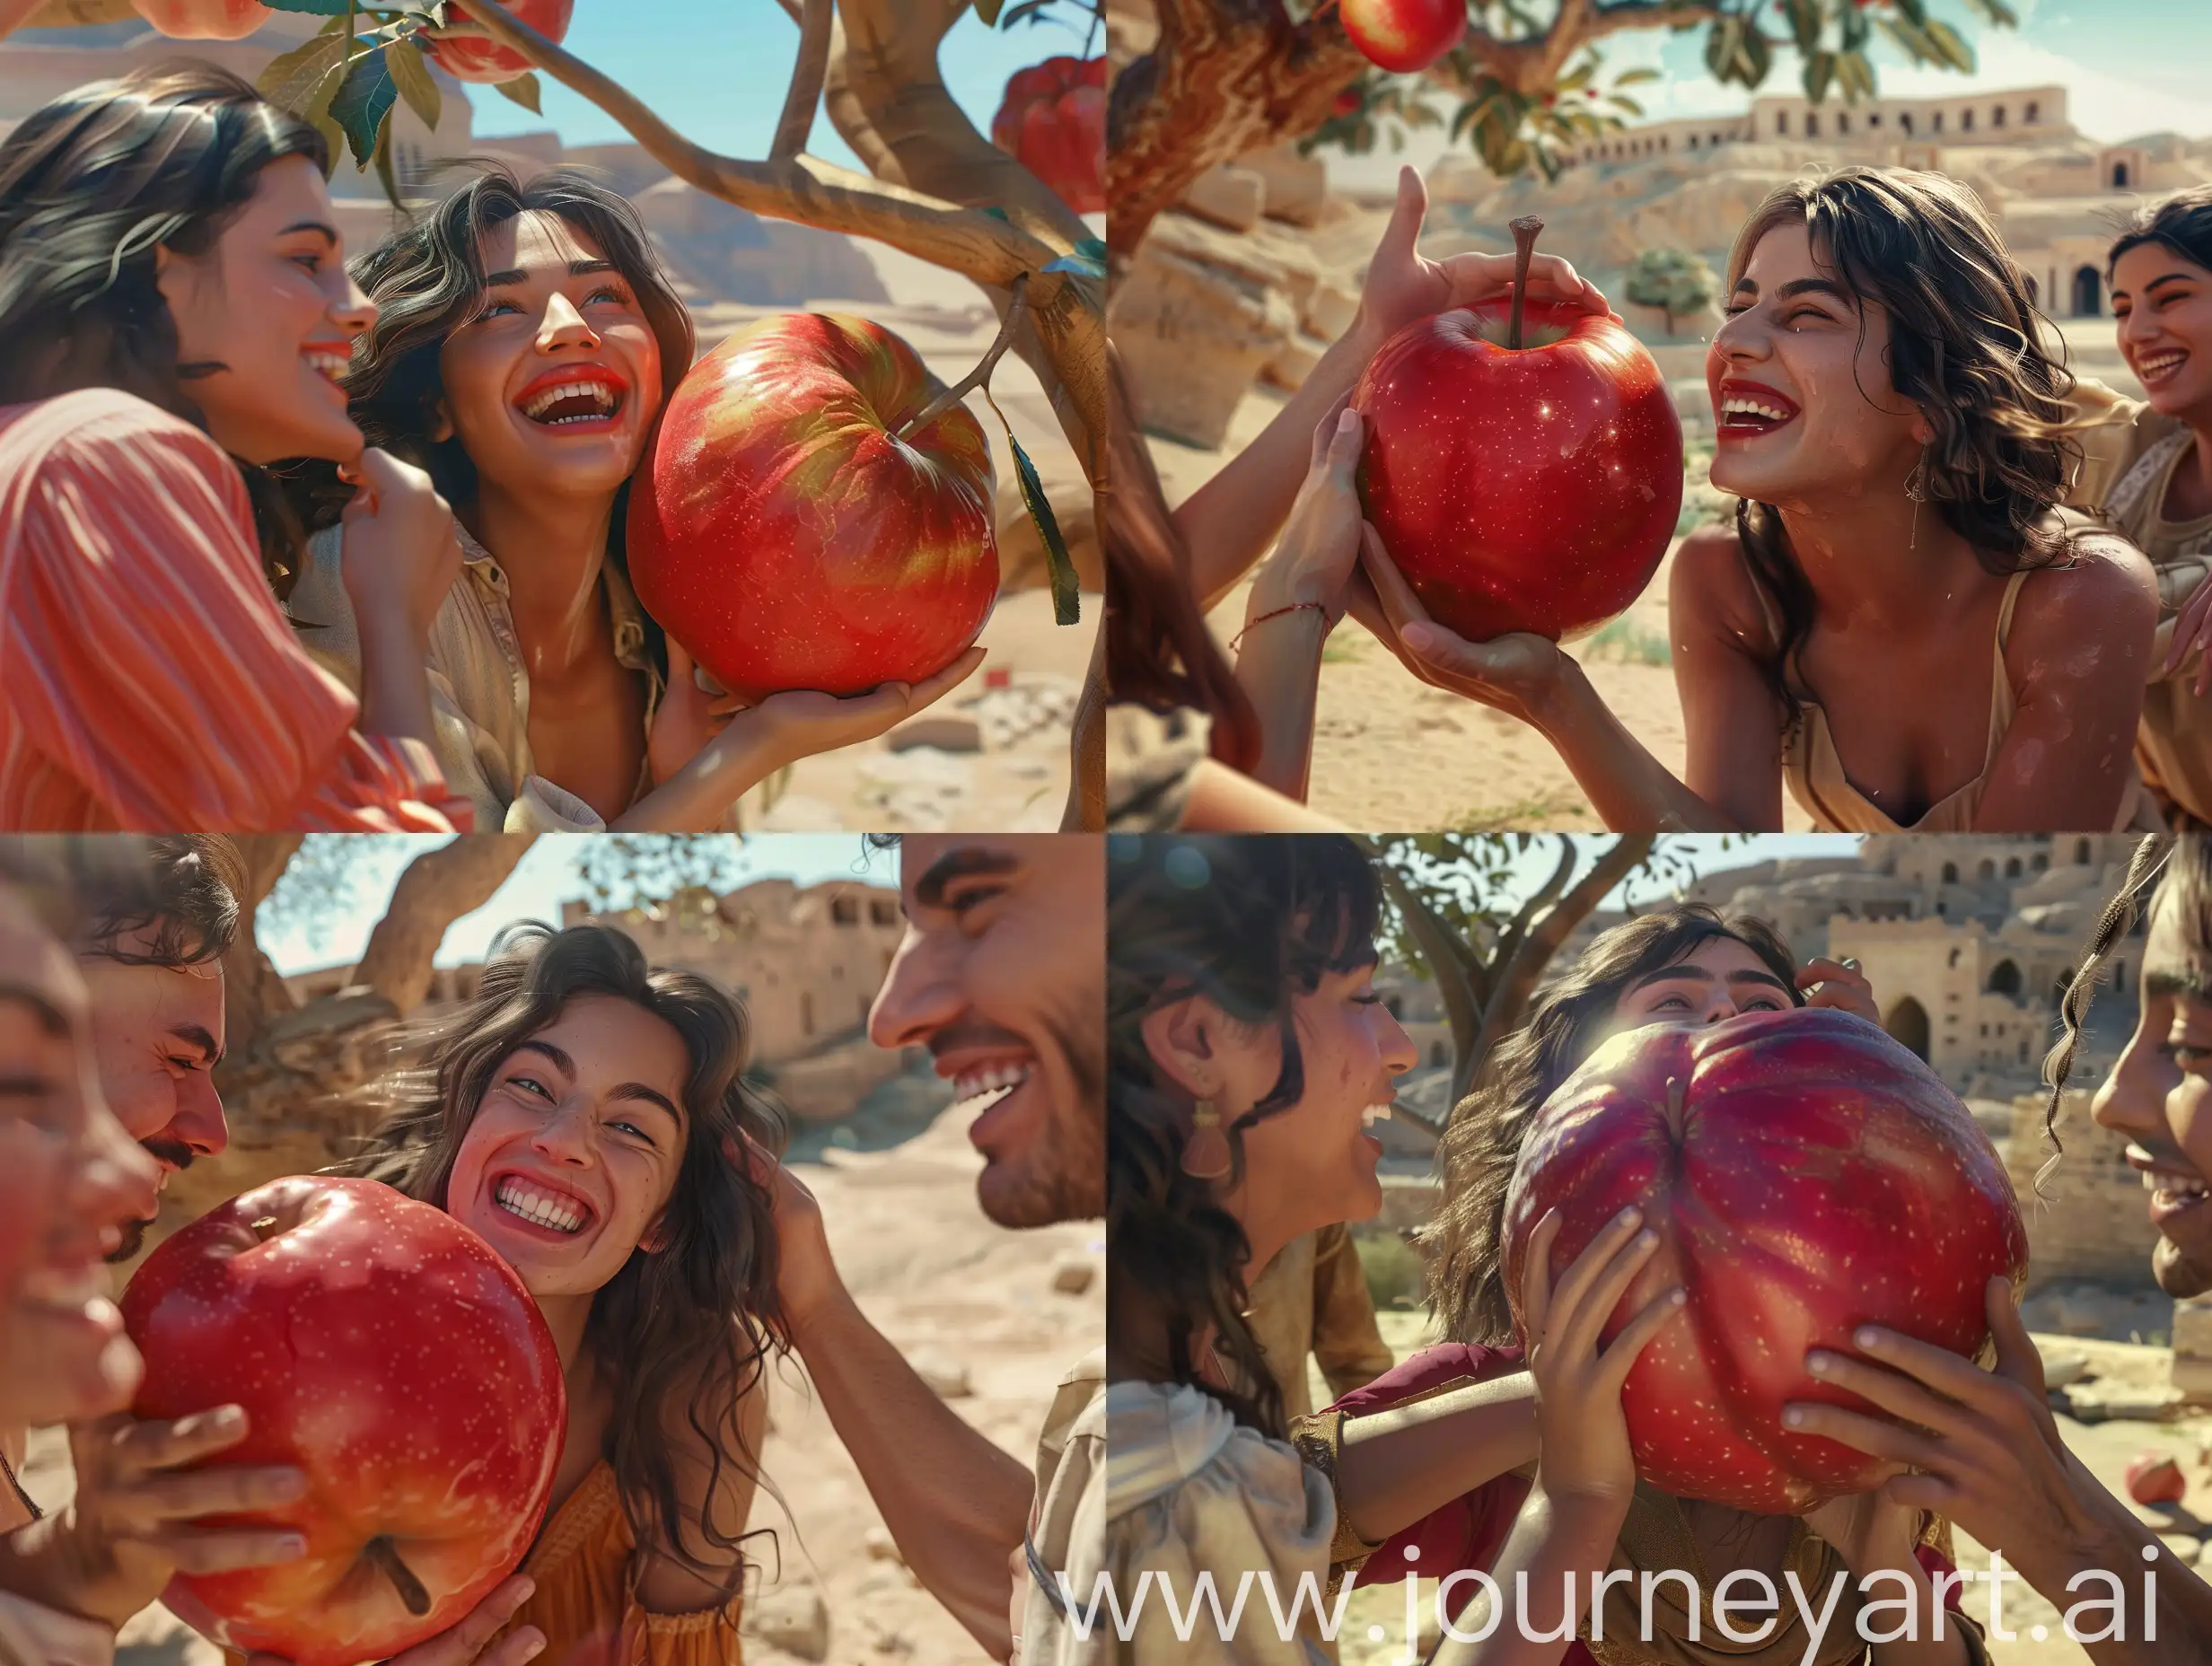 A beautiful smiling Persian young woman is holding a big red apple the size of a watermelon as she is about to bite into it and her friends are teasing her, they are outside the Bam citadel under a giant apple tree in a desert, in an ancient civilization, cinematic, epic realism,8K, highly detailed, bird's eye view